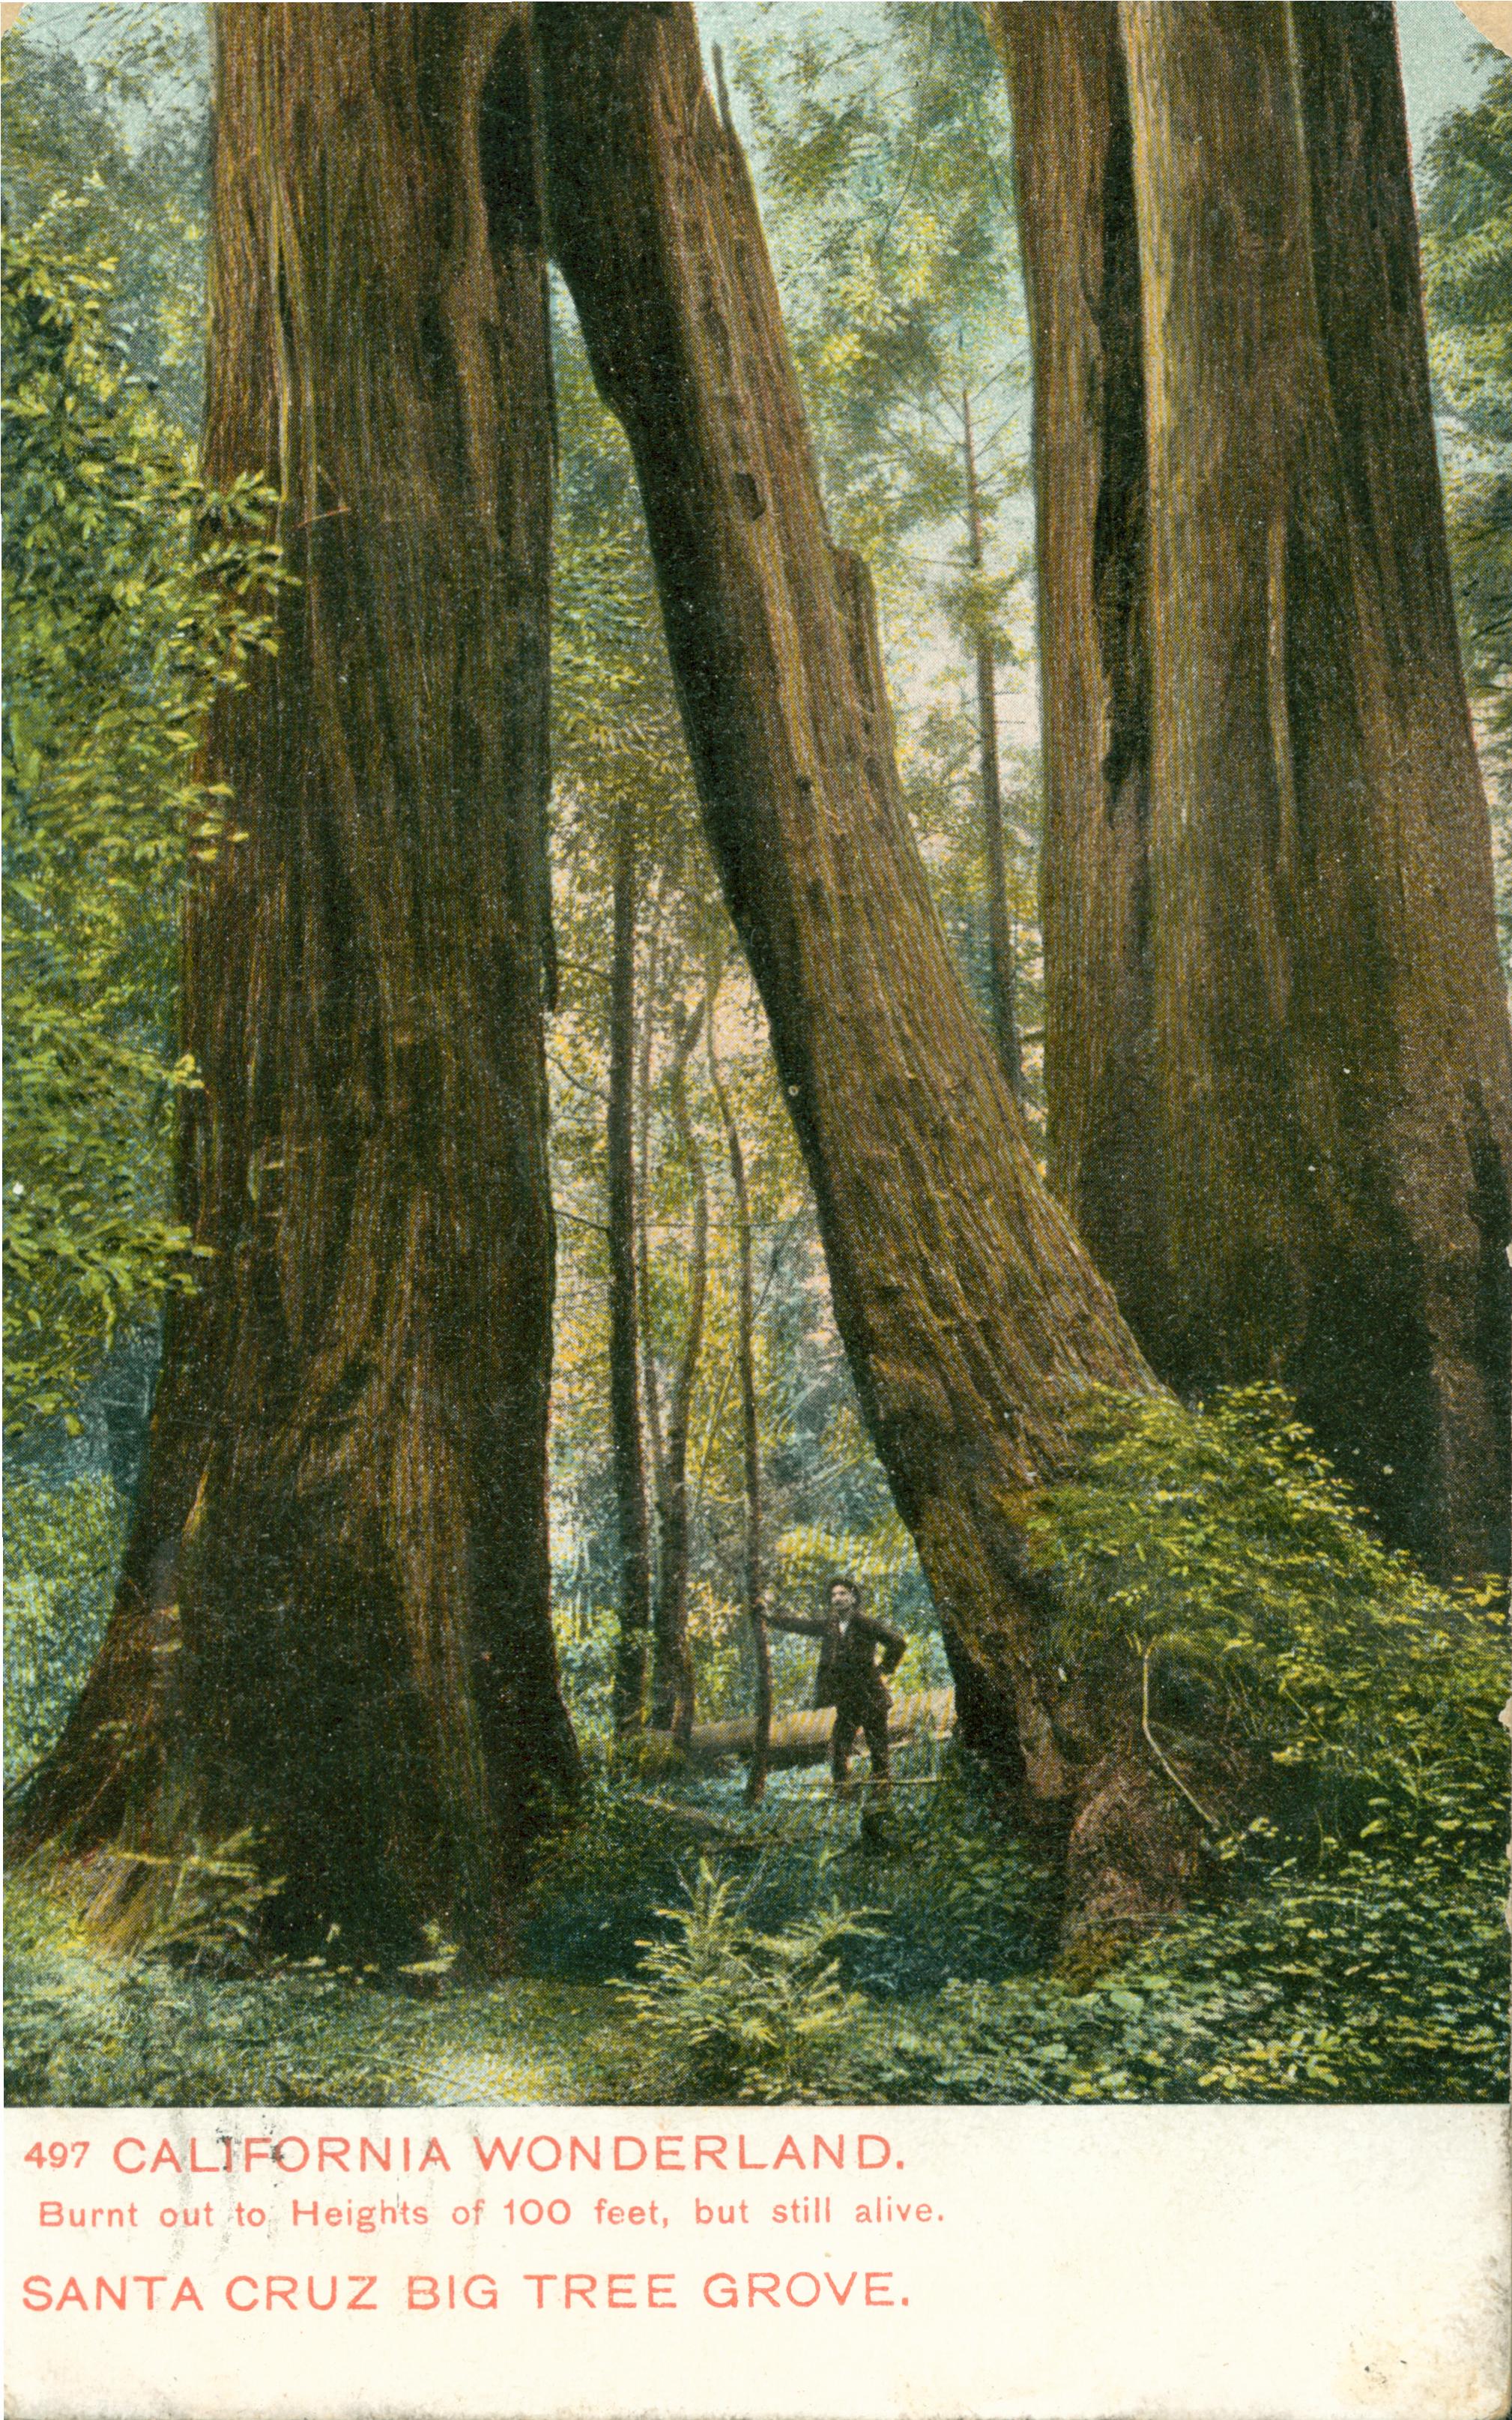 Shows a man standing within the split base of a California Redwood